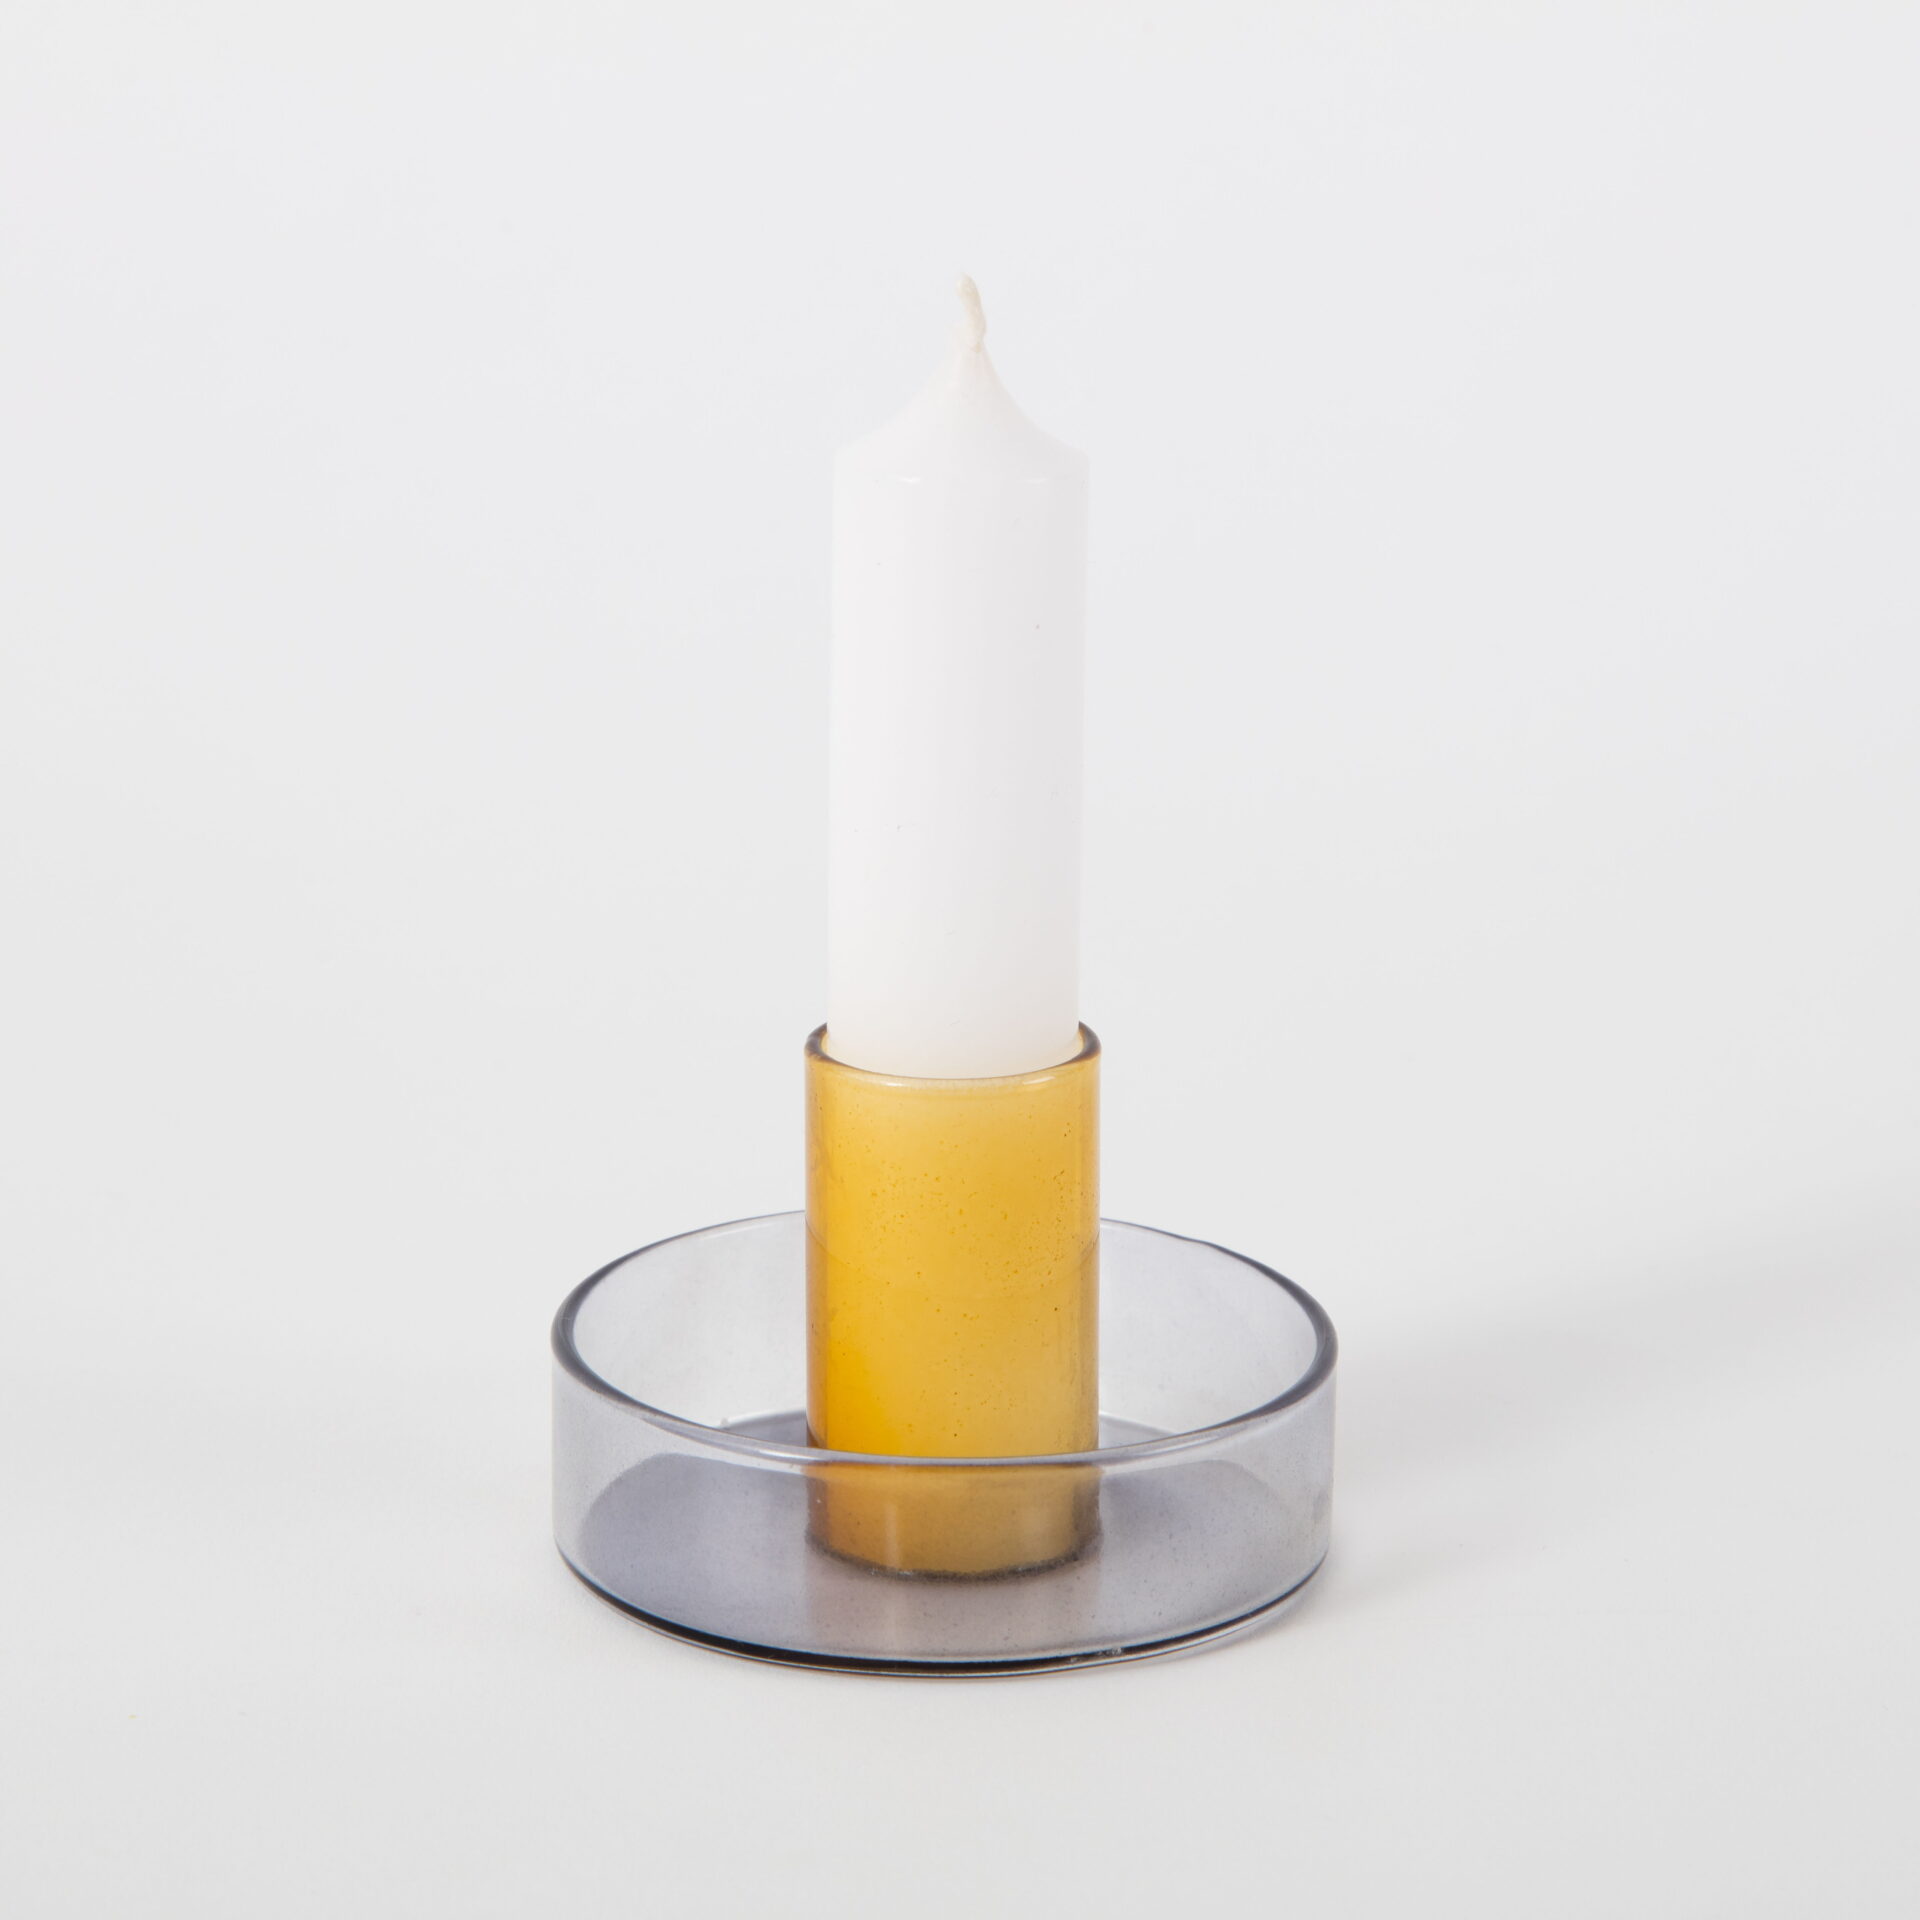 Duo Colour Glass Candlestick Holder from Block Design